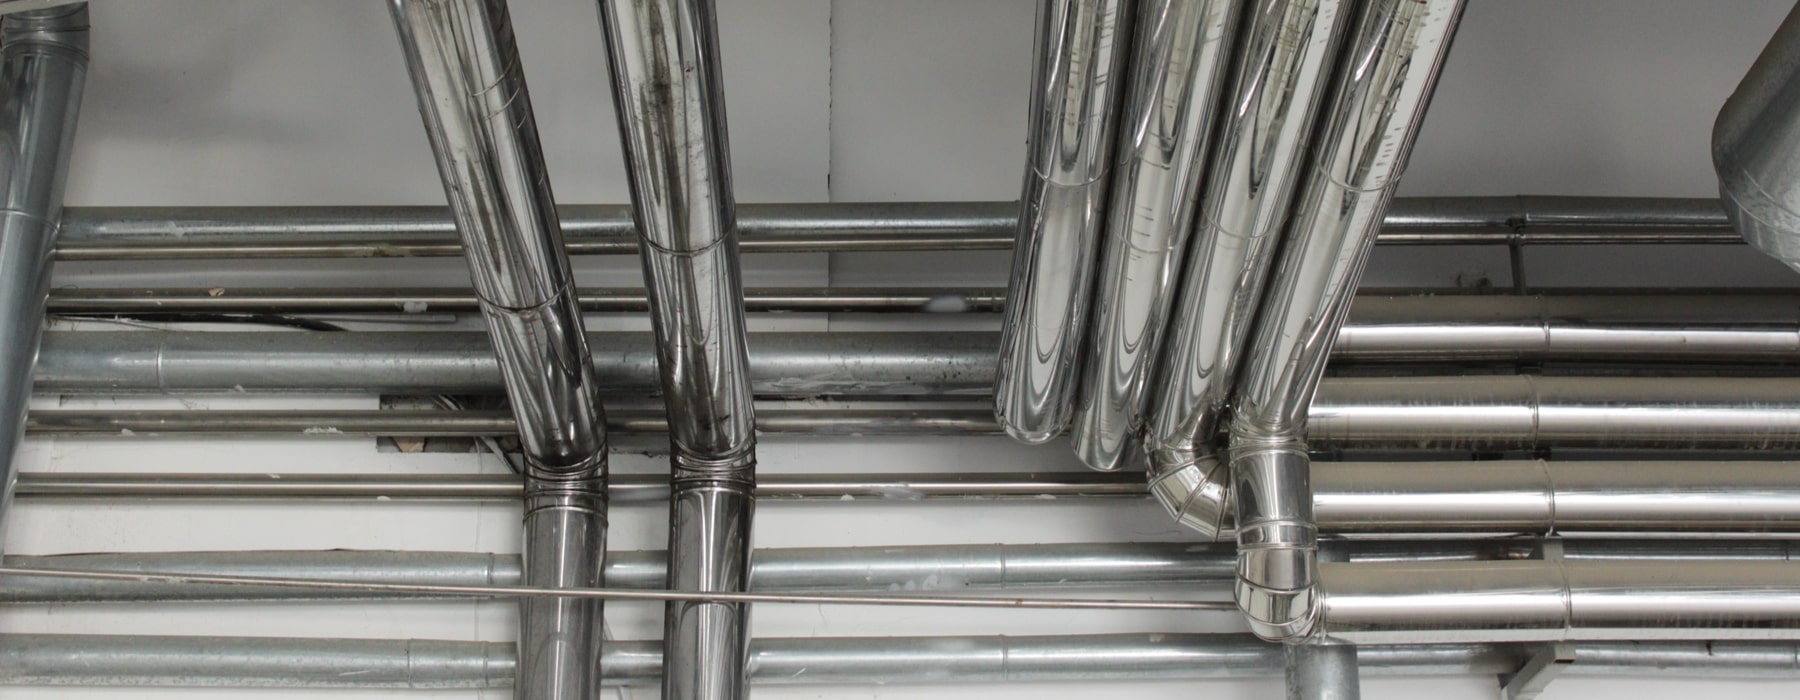 NYC Code Compliance and Flue Design